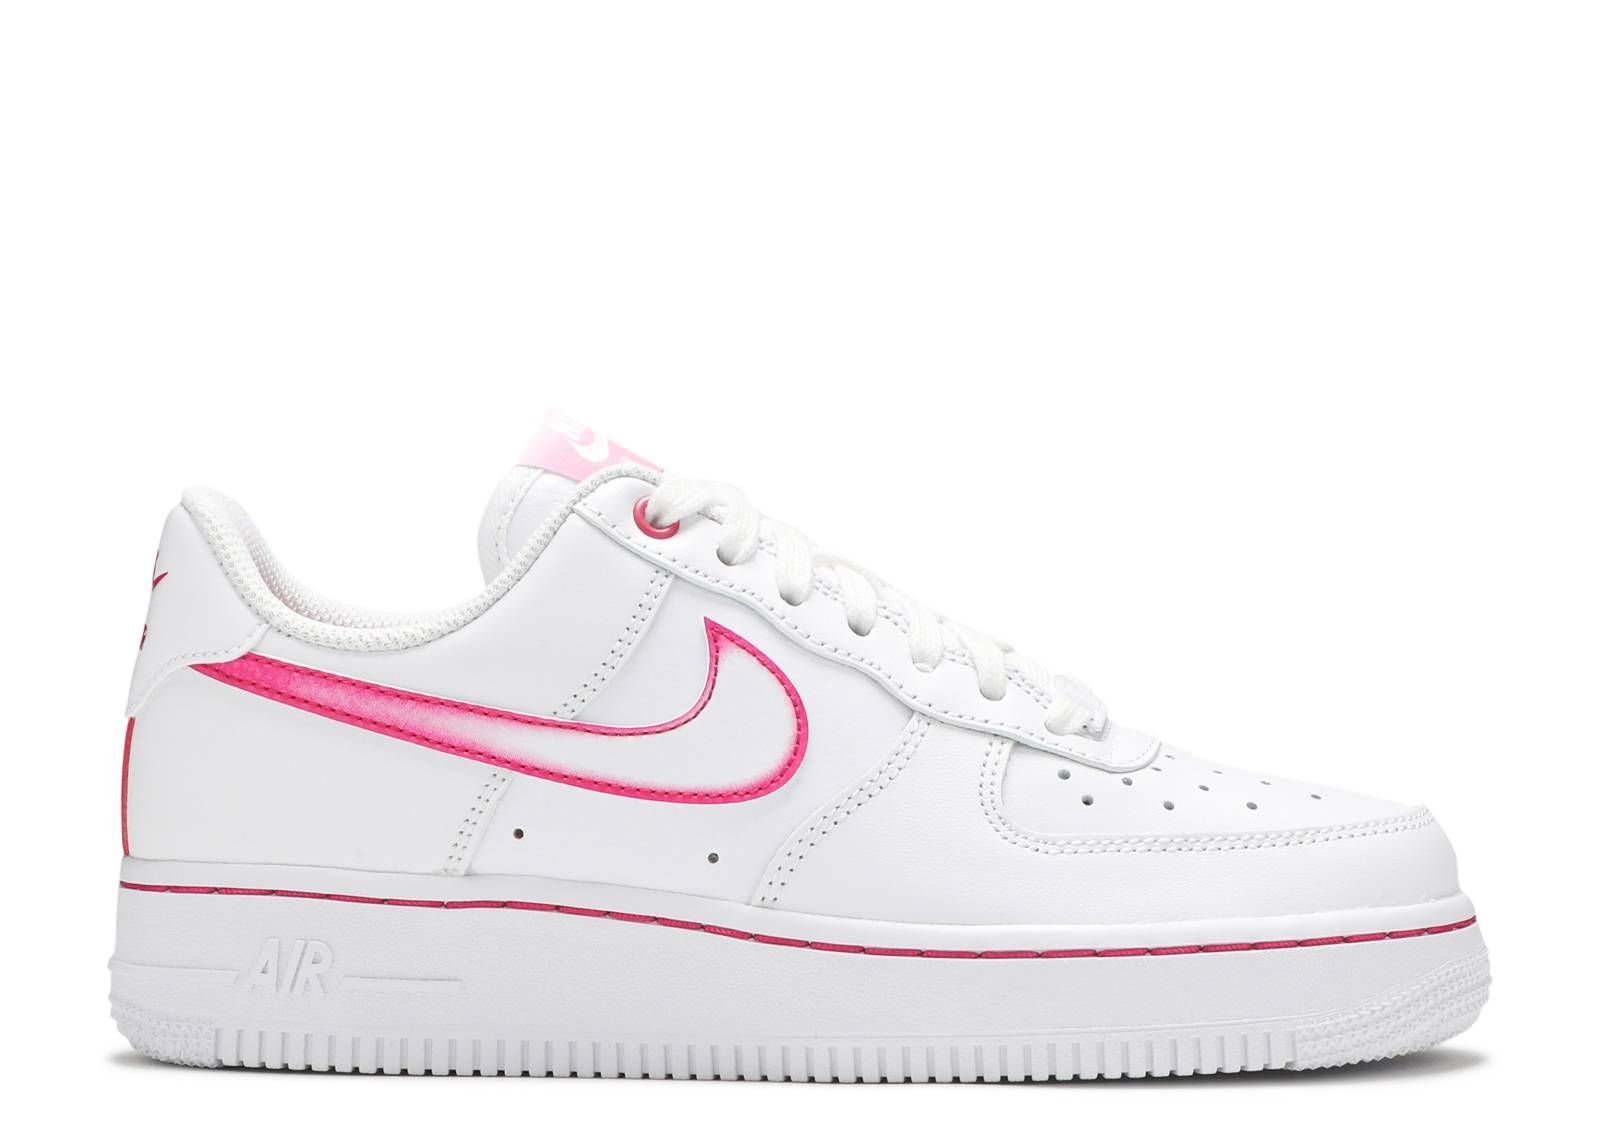 Air Force 1 Low 'Airbrush Pink Gradient'